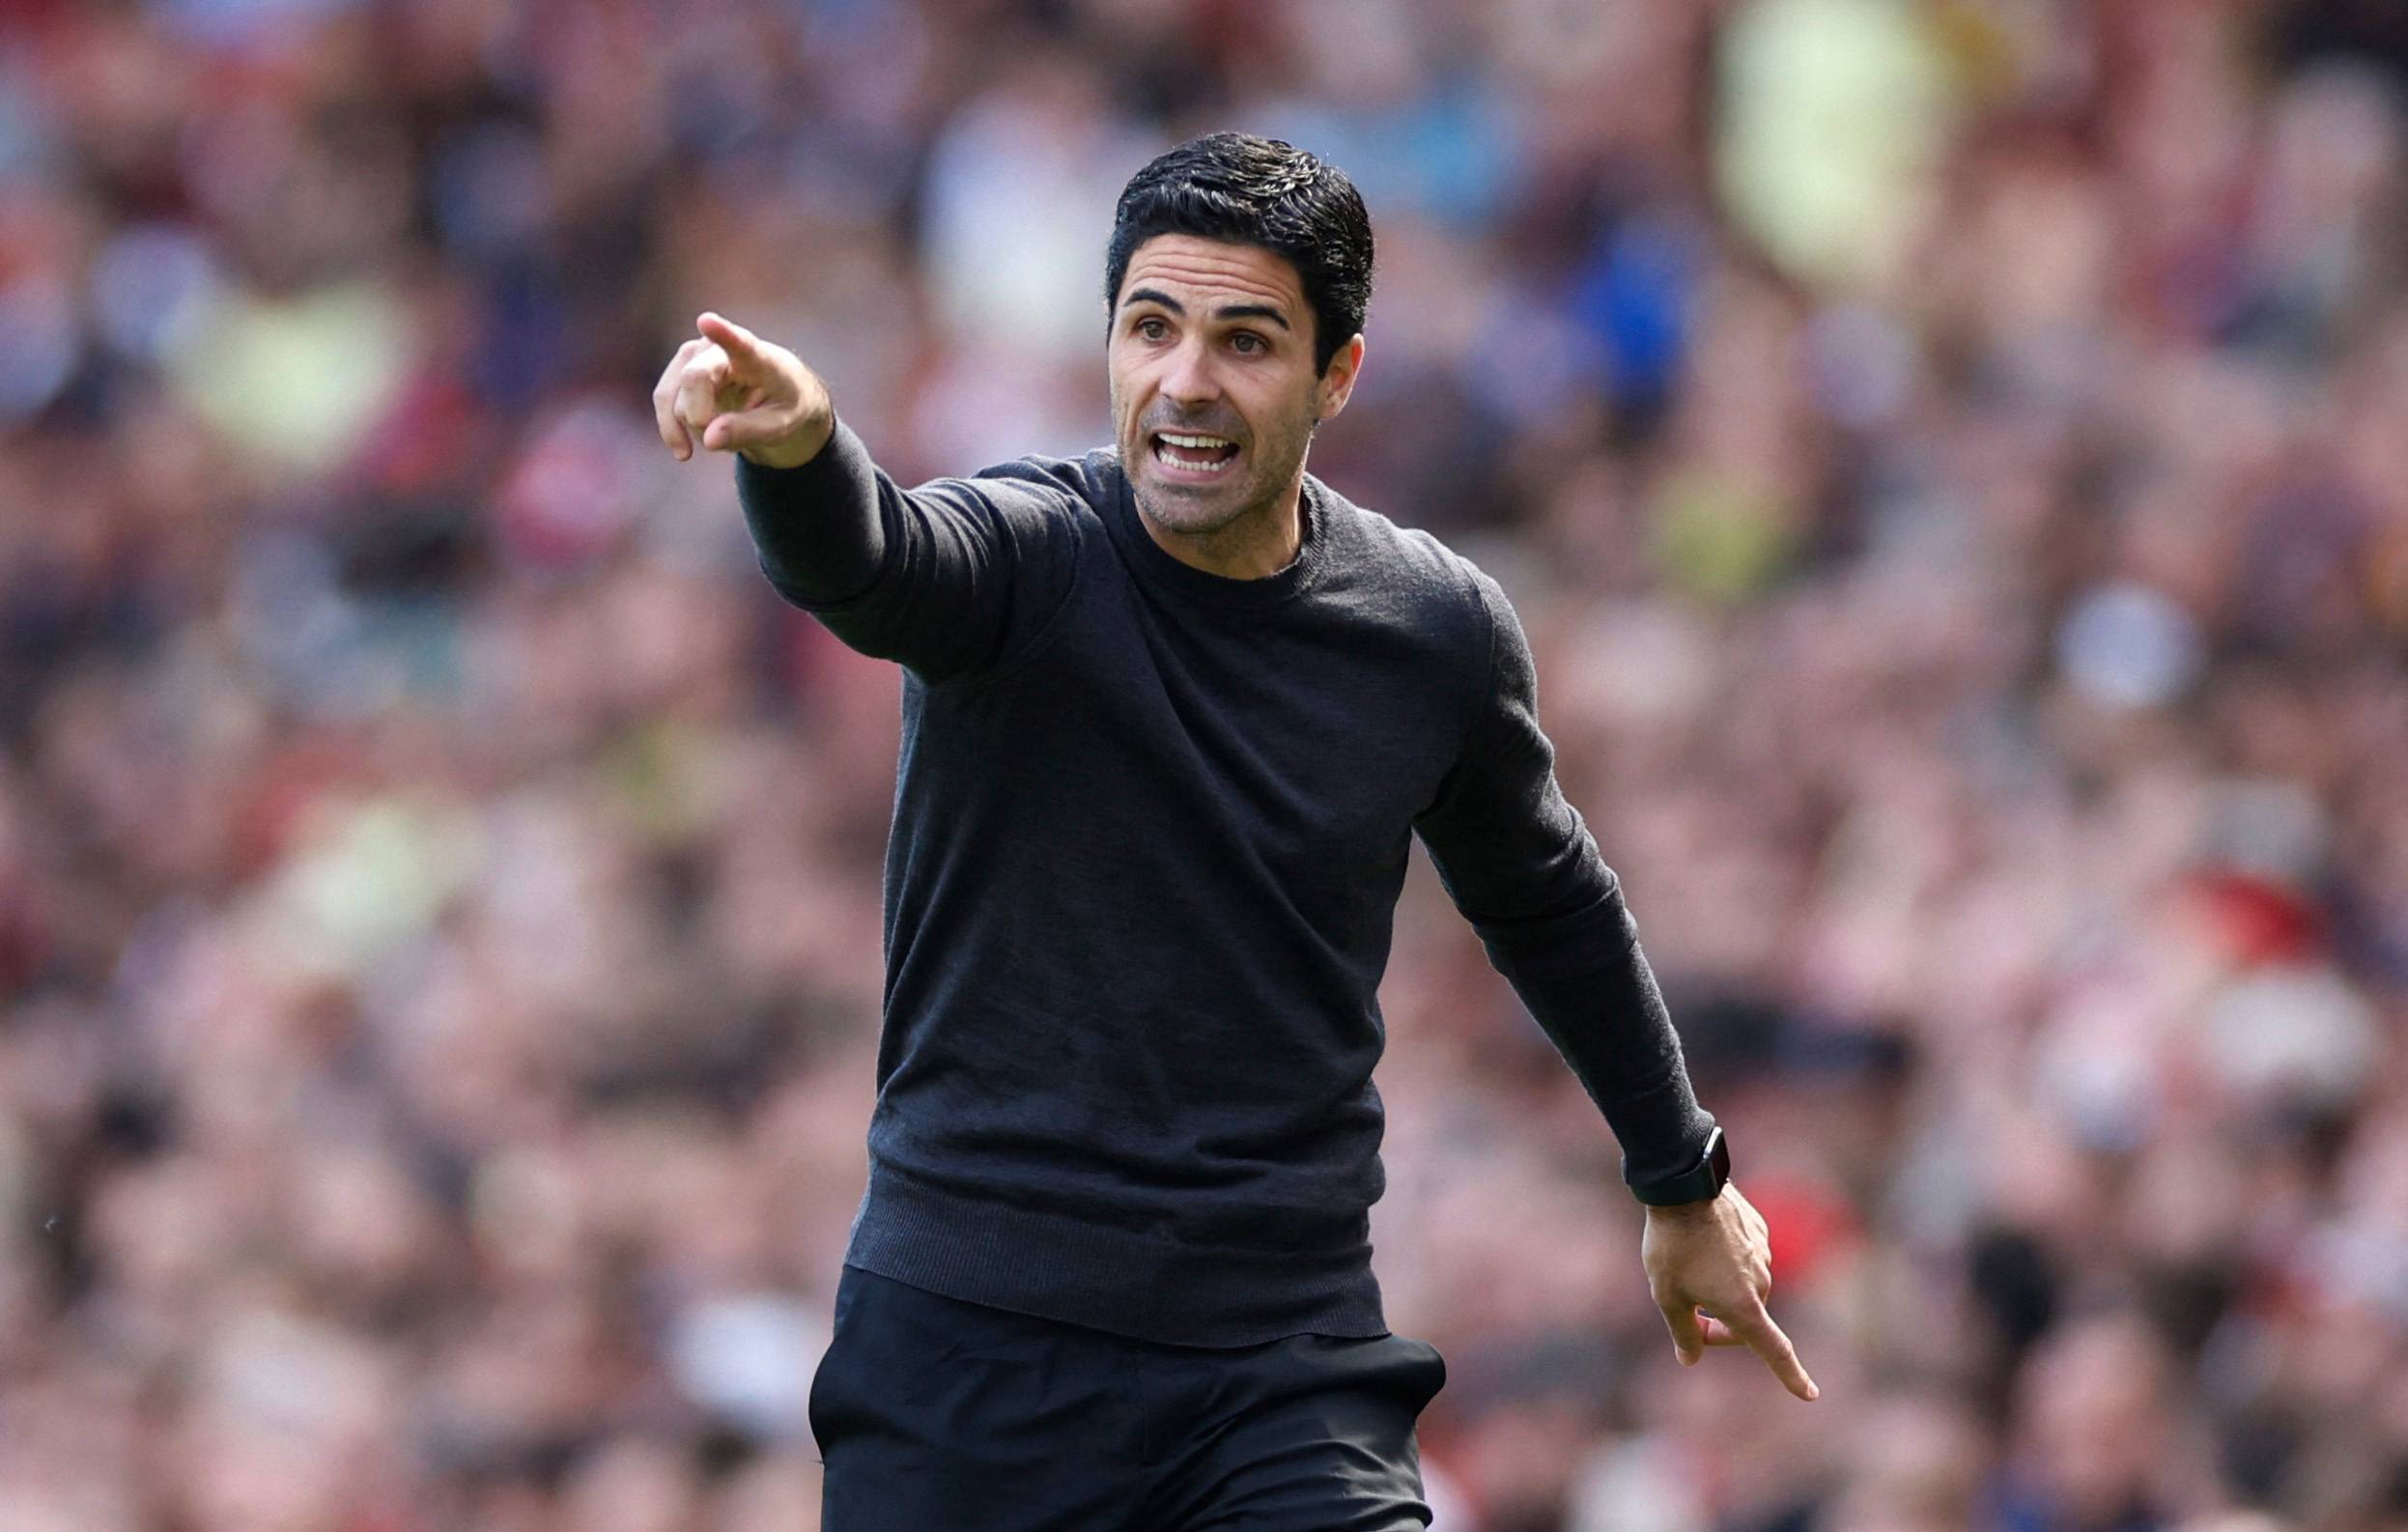 Mikel Arteta gives instructions to his Arsenal players during a Premier League game